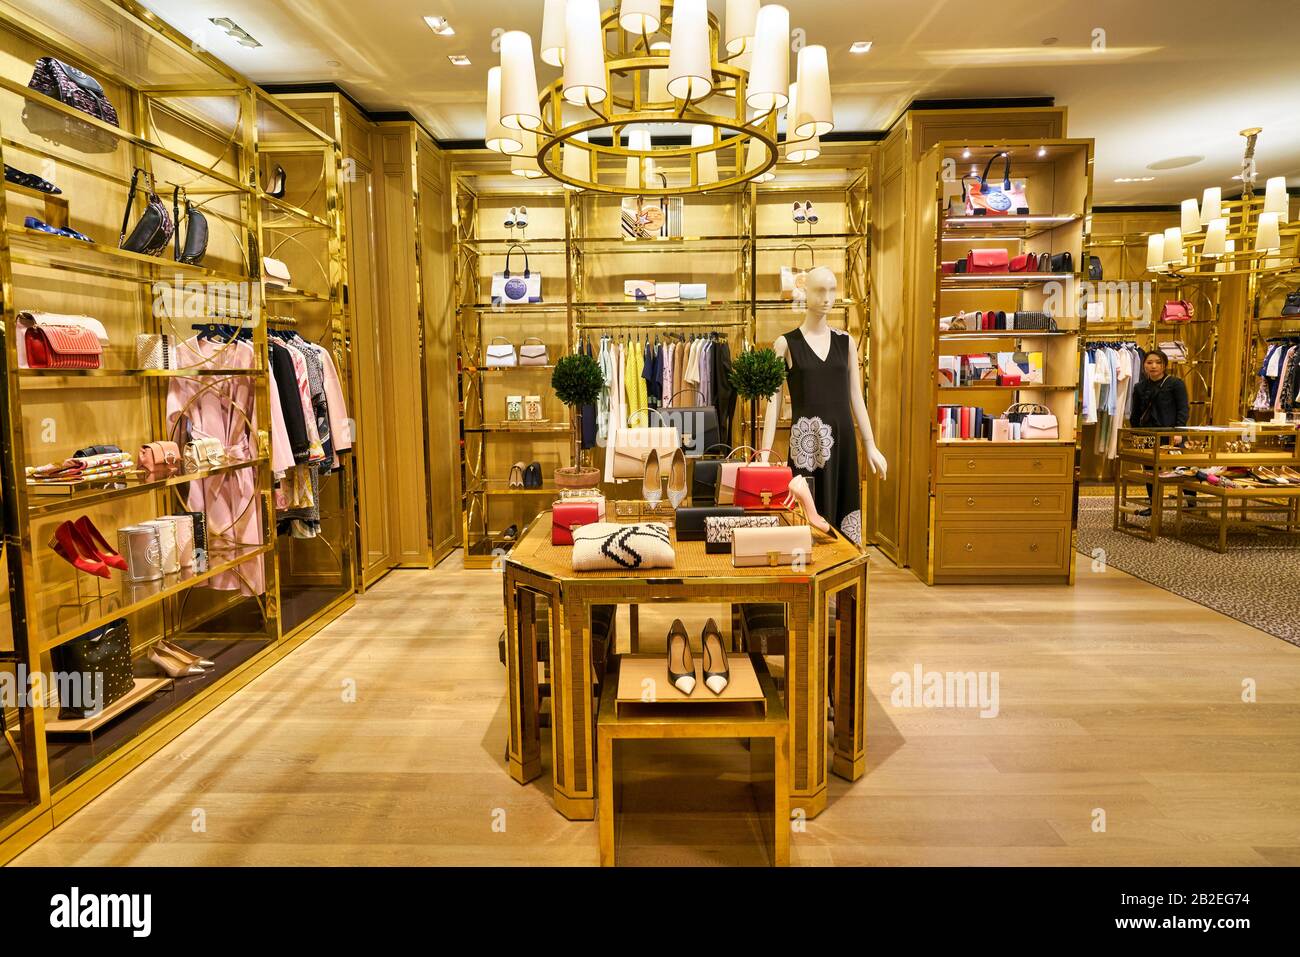 Tory Burch opens its largest store in Shanghai